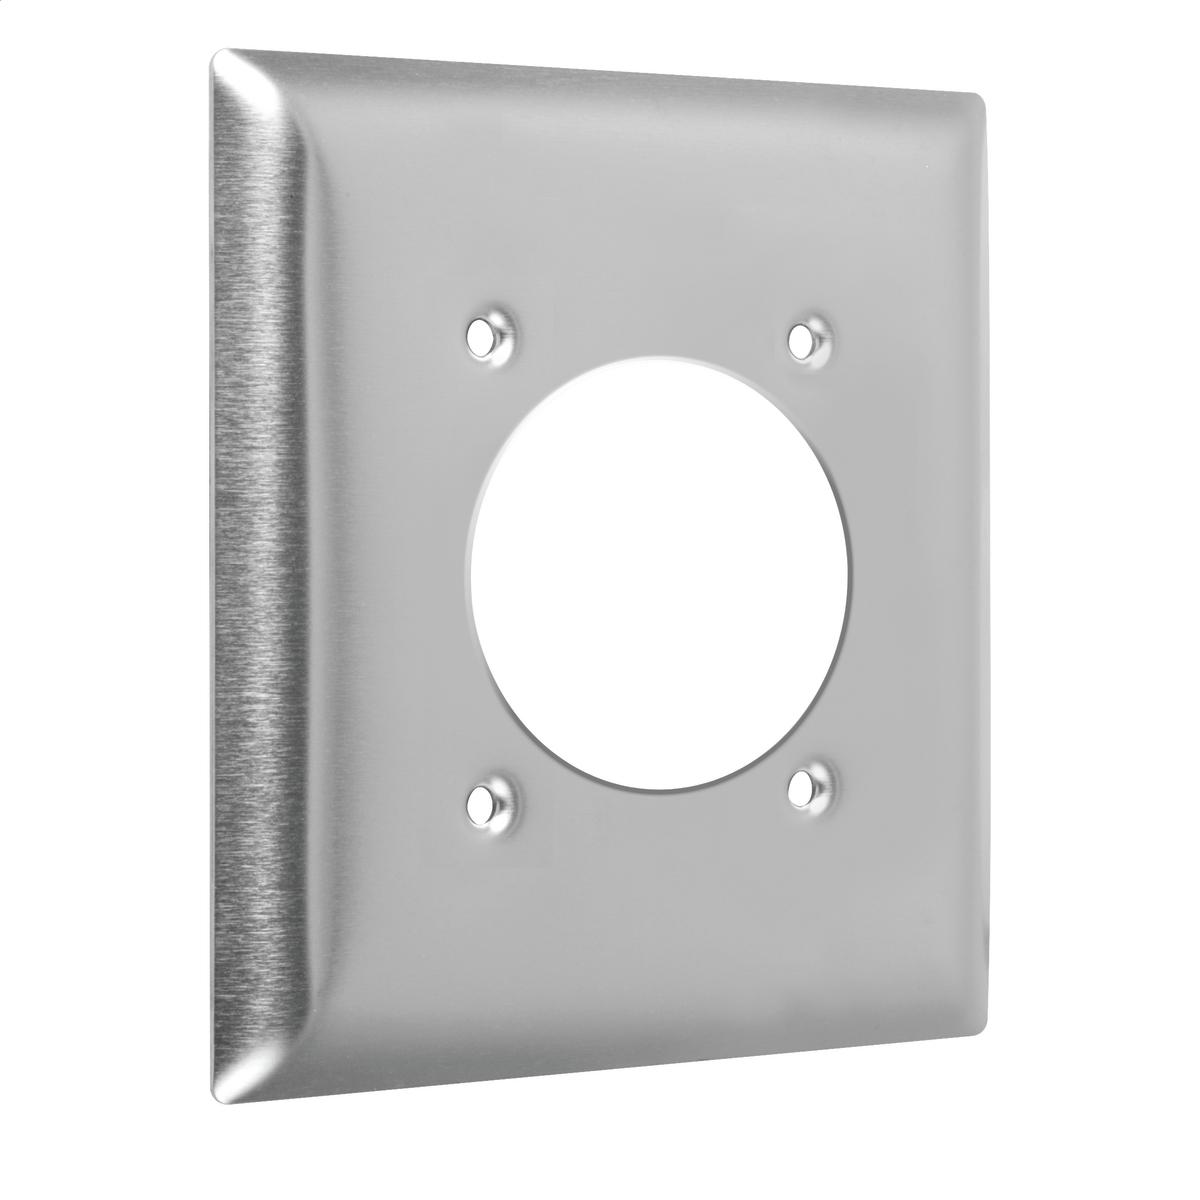 Hubbell WSS2-2 2-Gang Metal Wallplate, Standard, Single Receptacle 2.15 in. dia., Stainless Steel  ; Easily primed and painted to match or complement walls. ; Won't bow, crack or distort during installation. ; Premium North American powder coat. ; Includes screw(s) in m